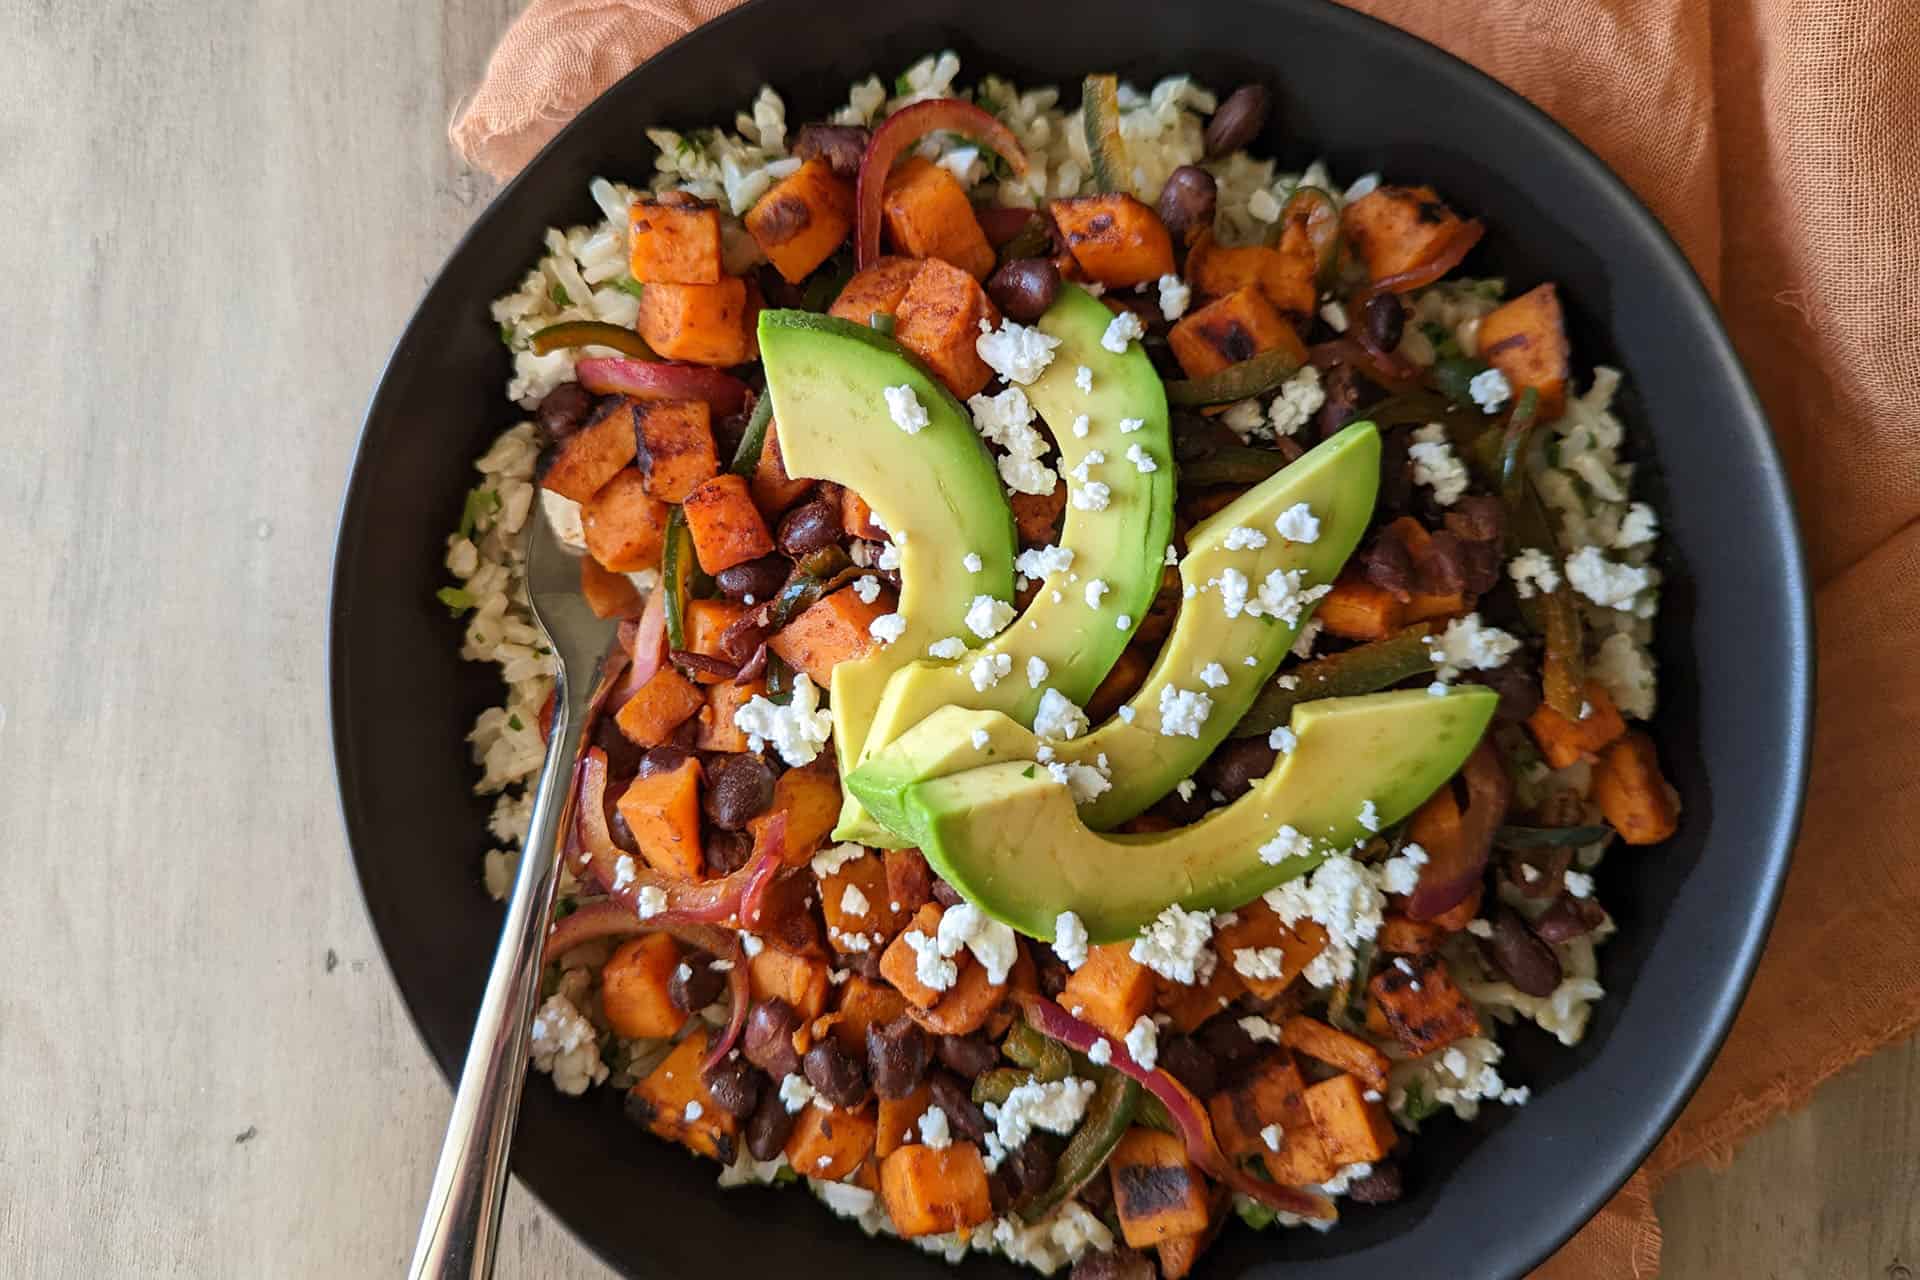 A healthy power bowl with brown rice, black beans, sweet potato, peppers, onion, and avocado